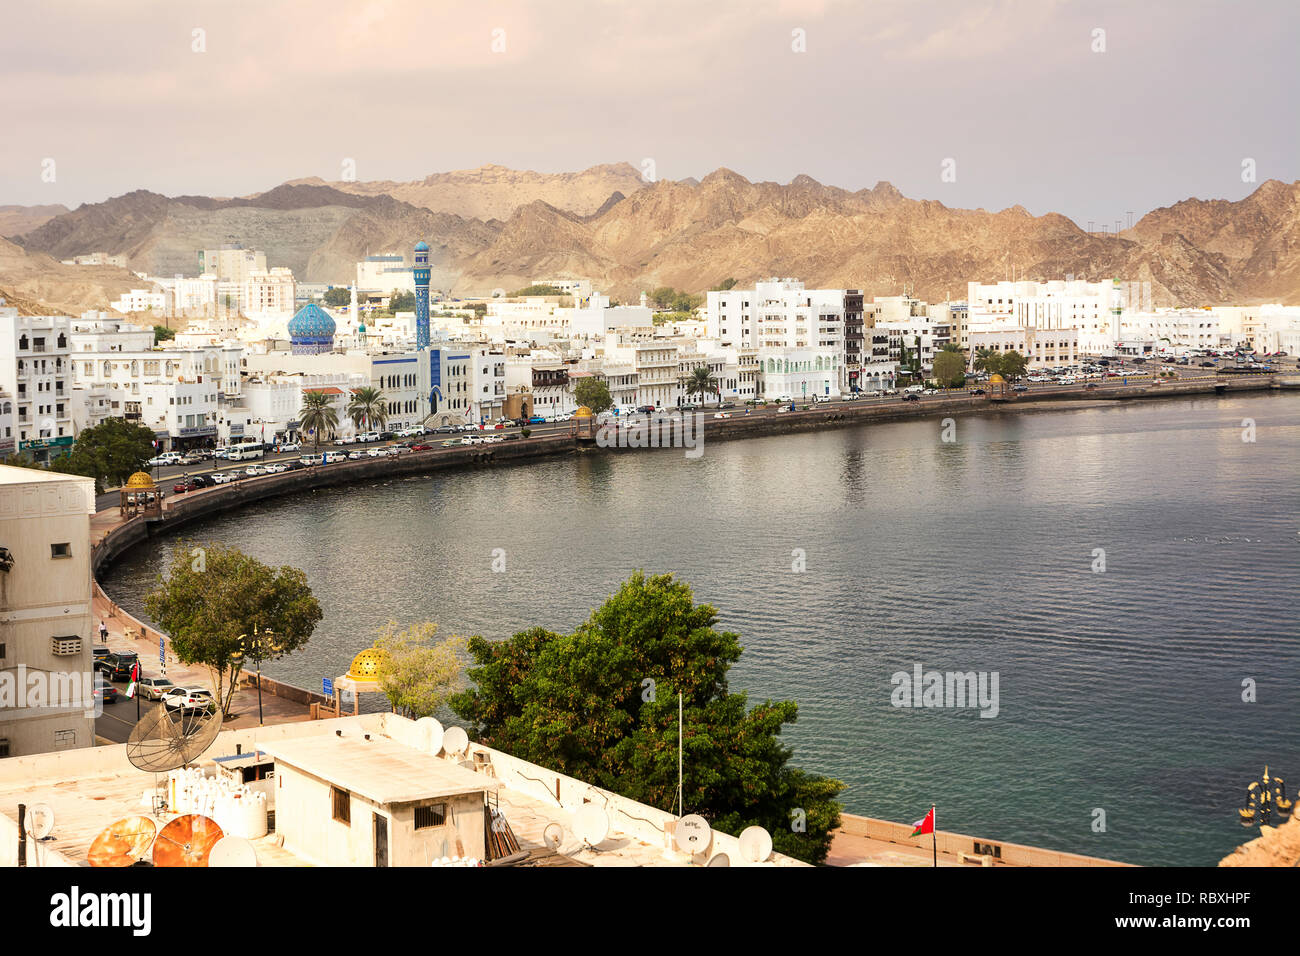 Muscat, Oman - November 1, 2018: Mutrah waterfront with Mosque in Muscat at sunset and Corniche with nobody Stock Photo